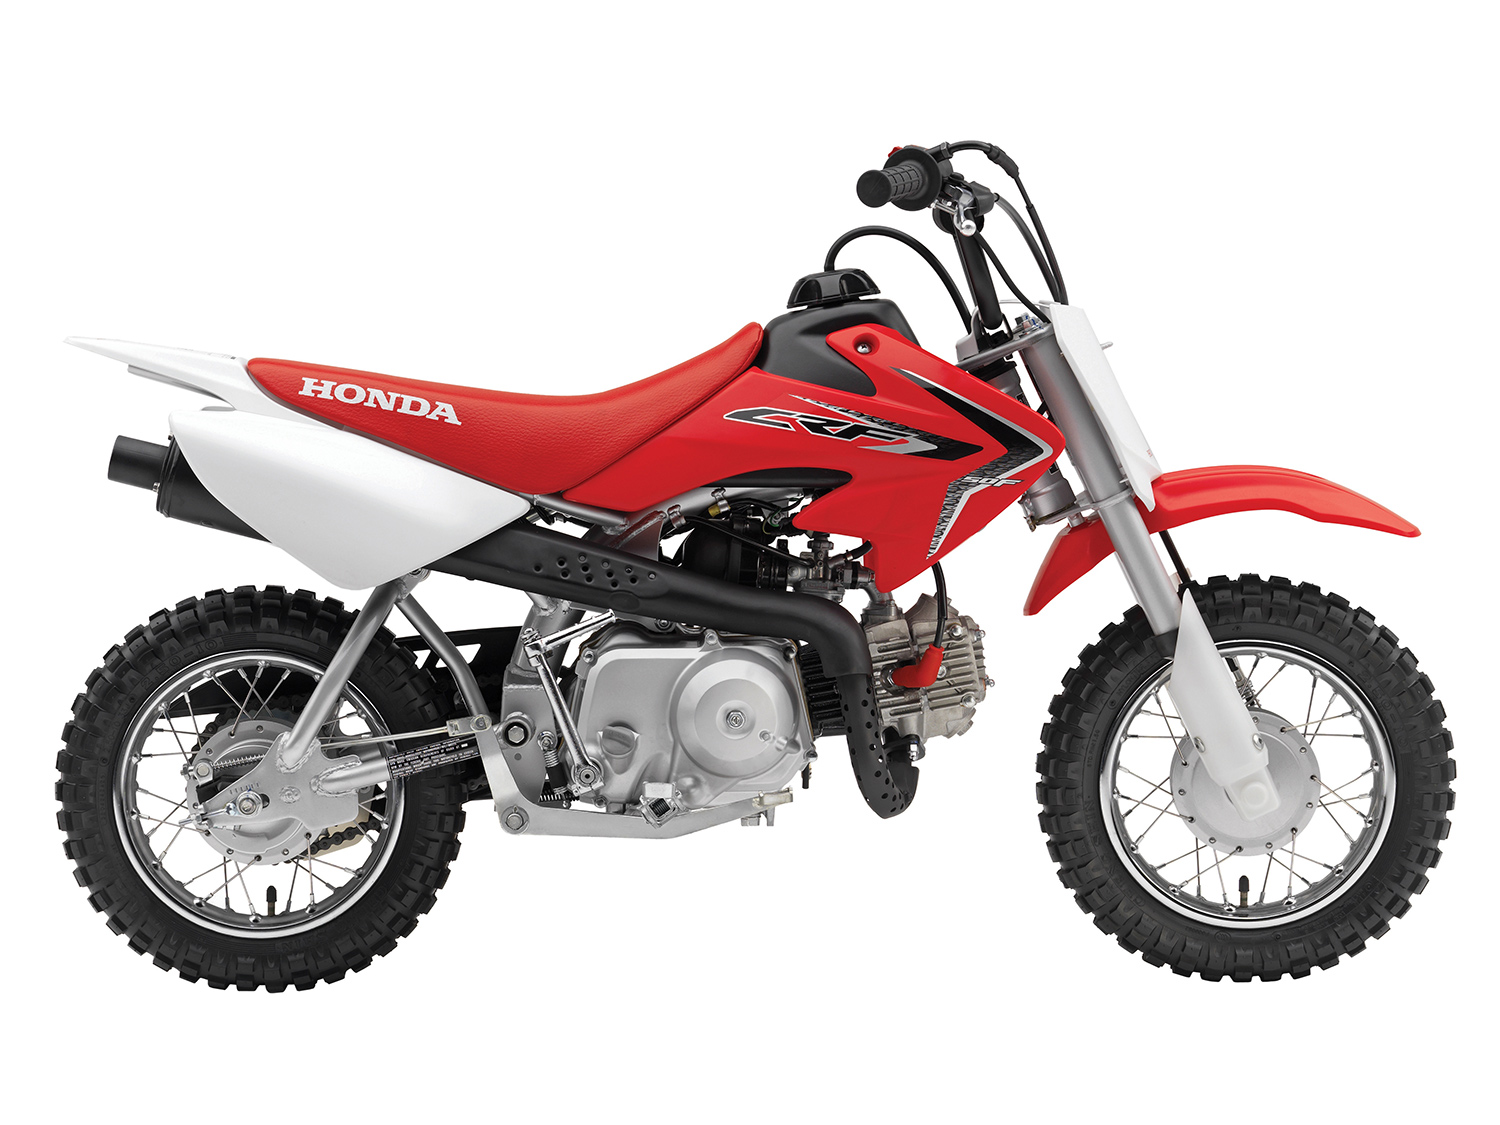 2020 Honda CRF50F Buyer's Guide: Specs, Photos, Price | Cycle World